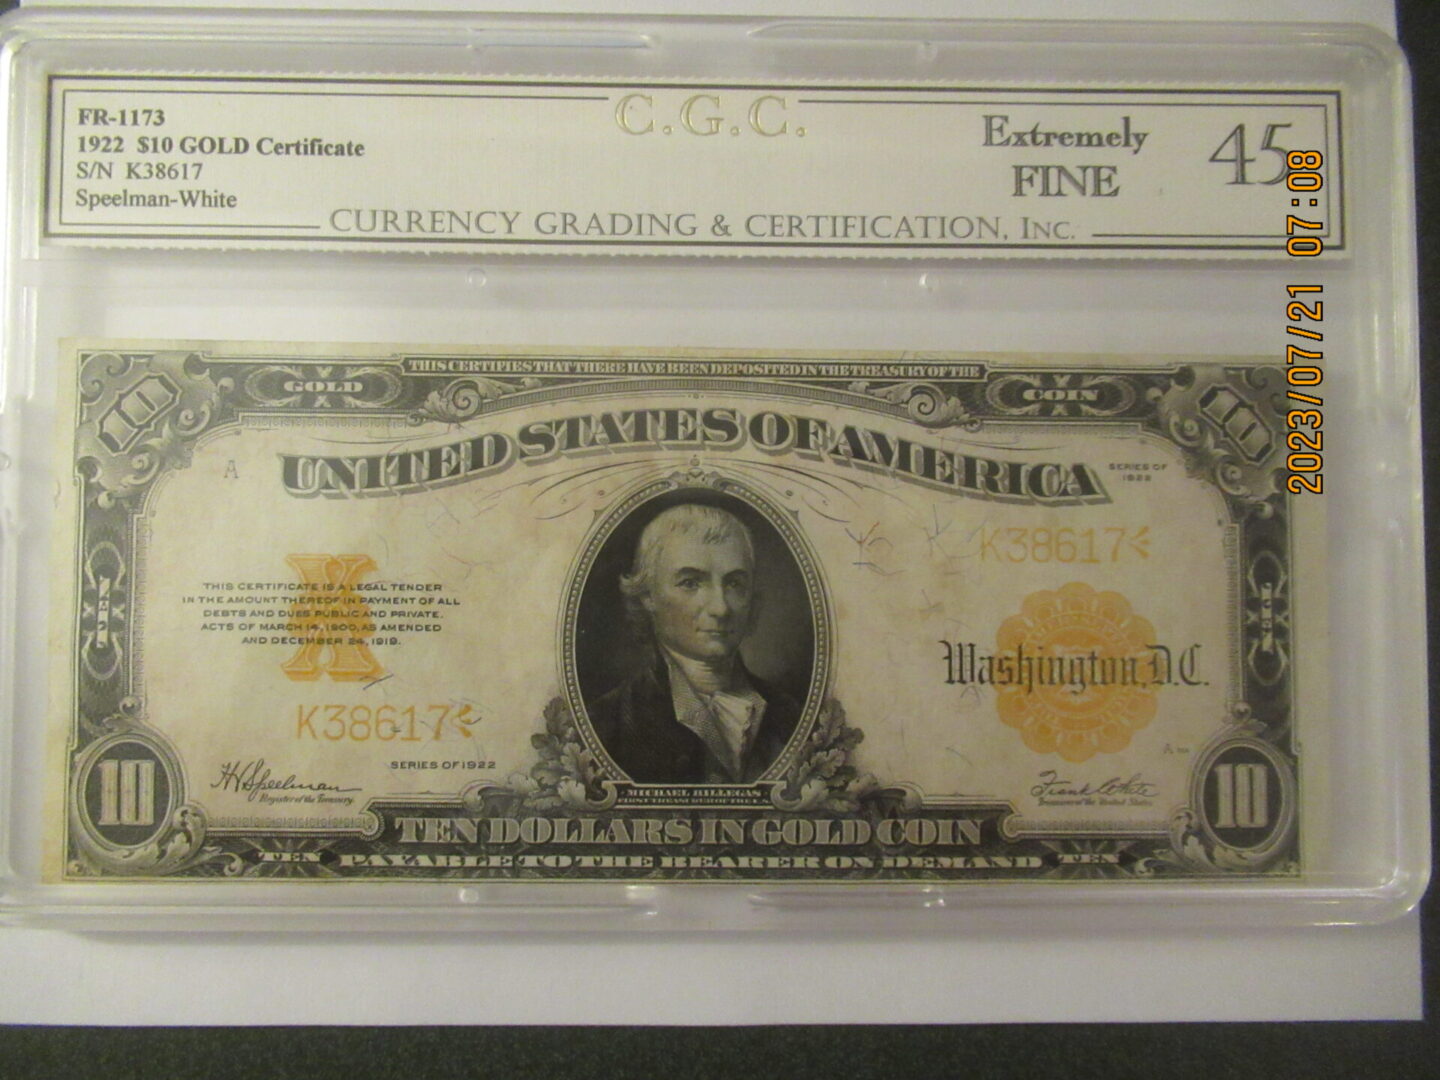 A gold certificate is displayed in front of the frame.